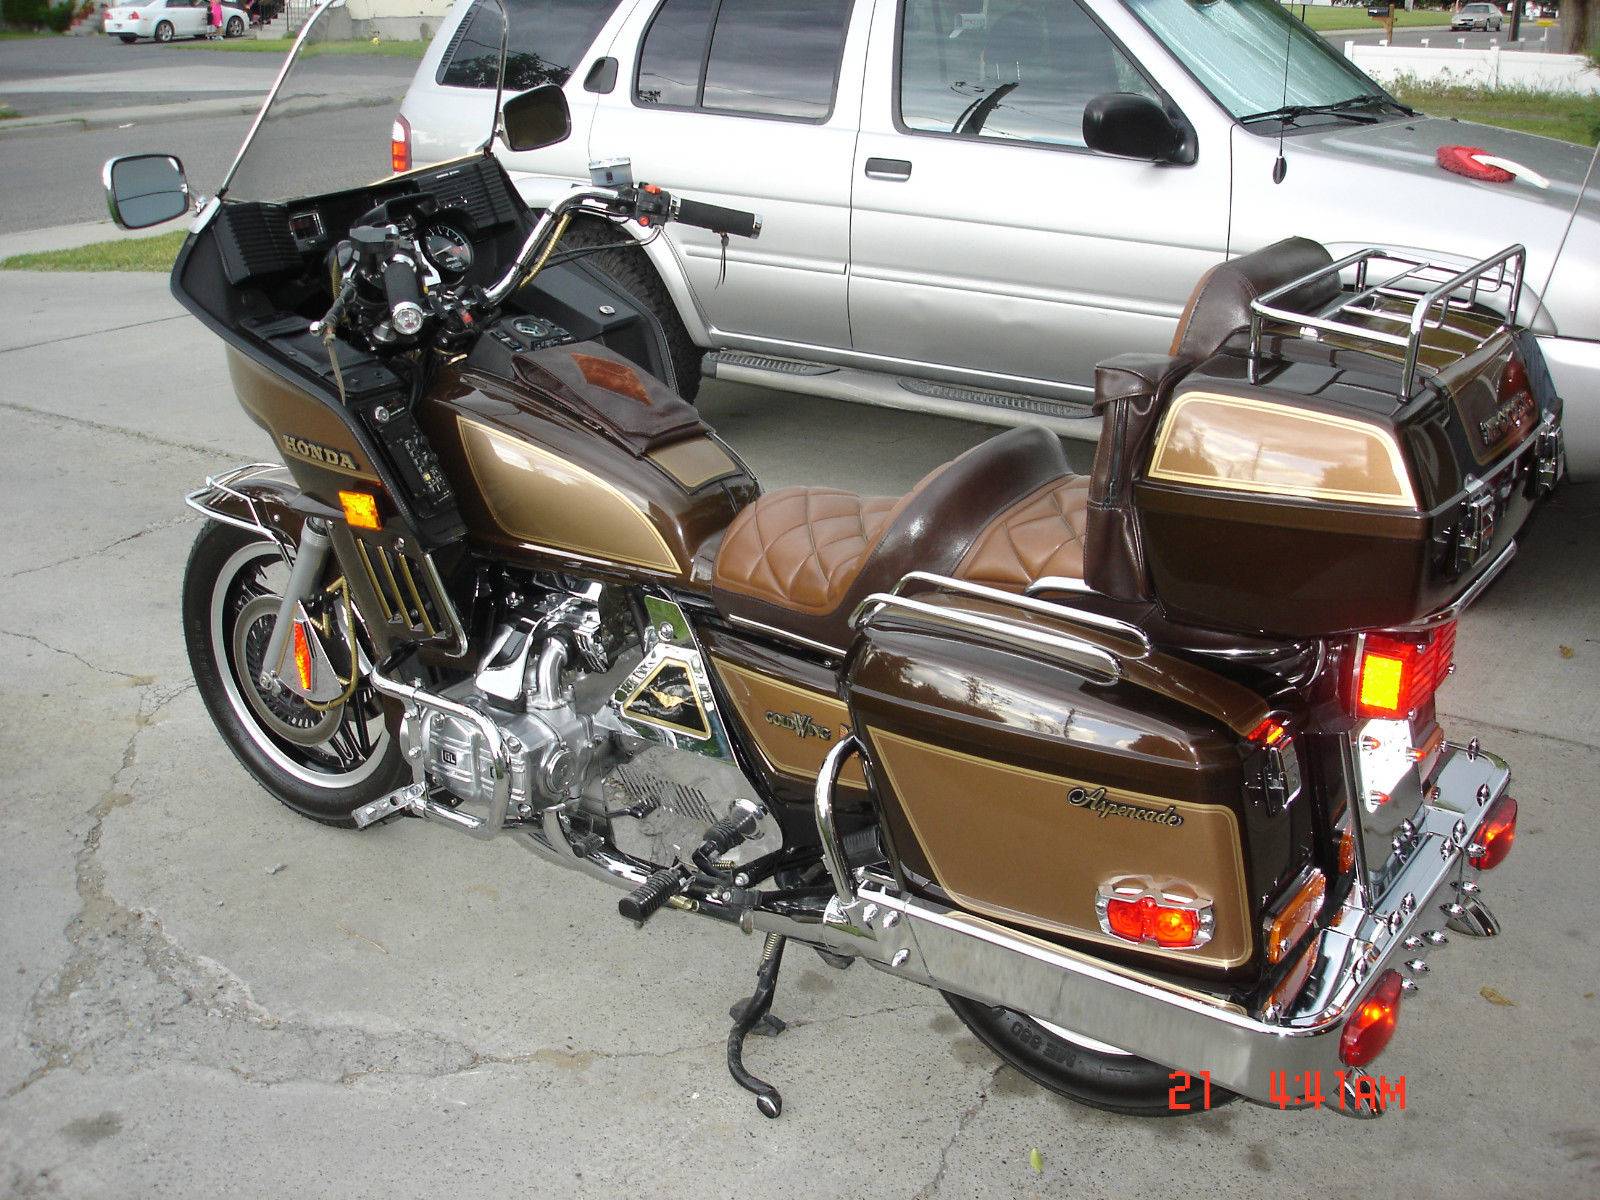 Honda gl1100 gold wing: review, history, specs